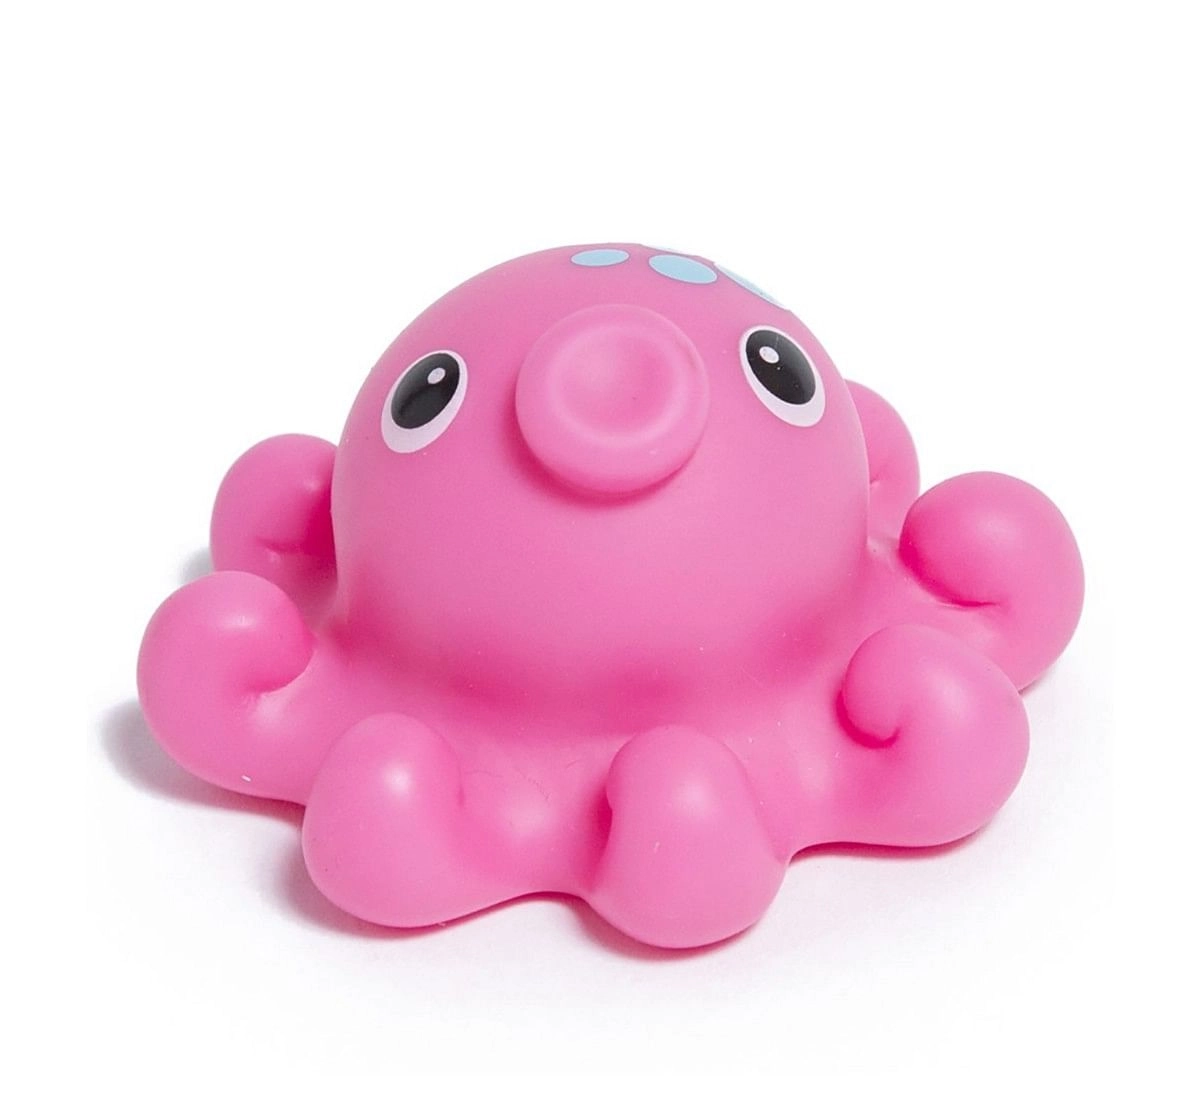 Hamleys Floating Light Up Octopus - Pink Bath Toys & Accessories for Kids age 2Y+ (Pink)